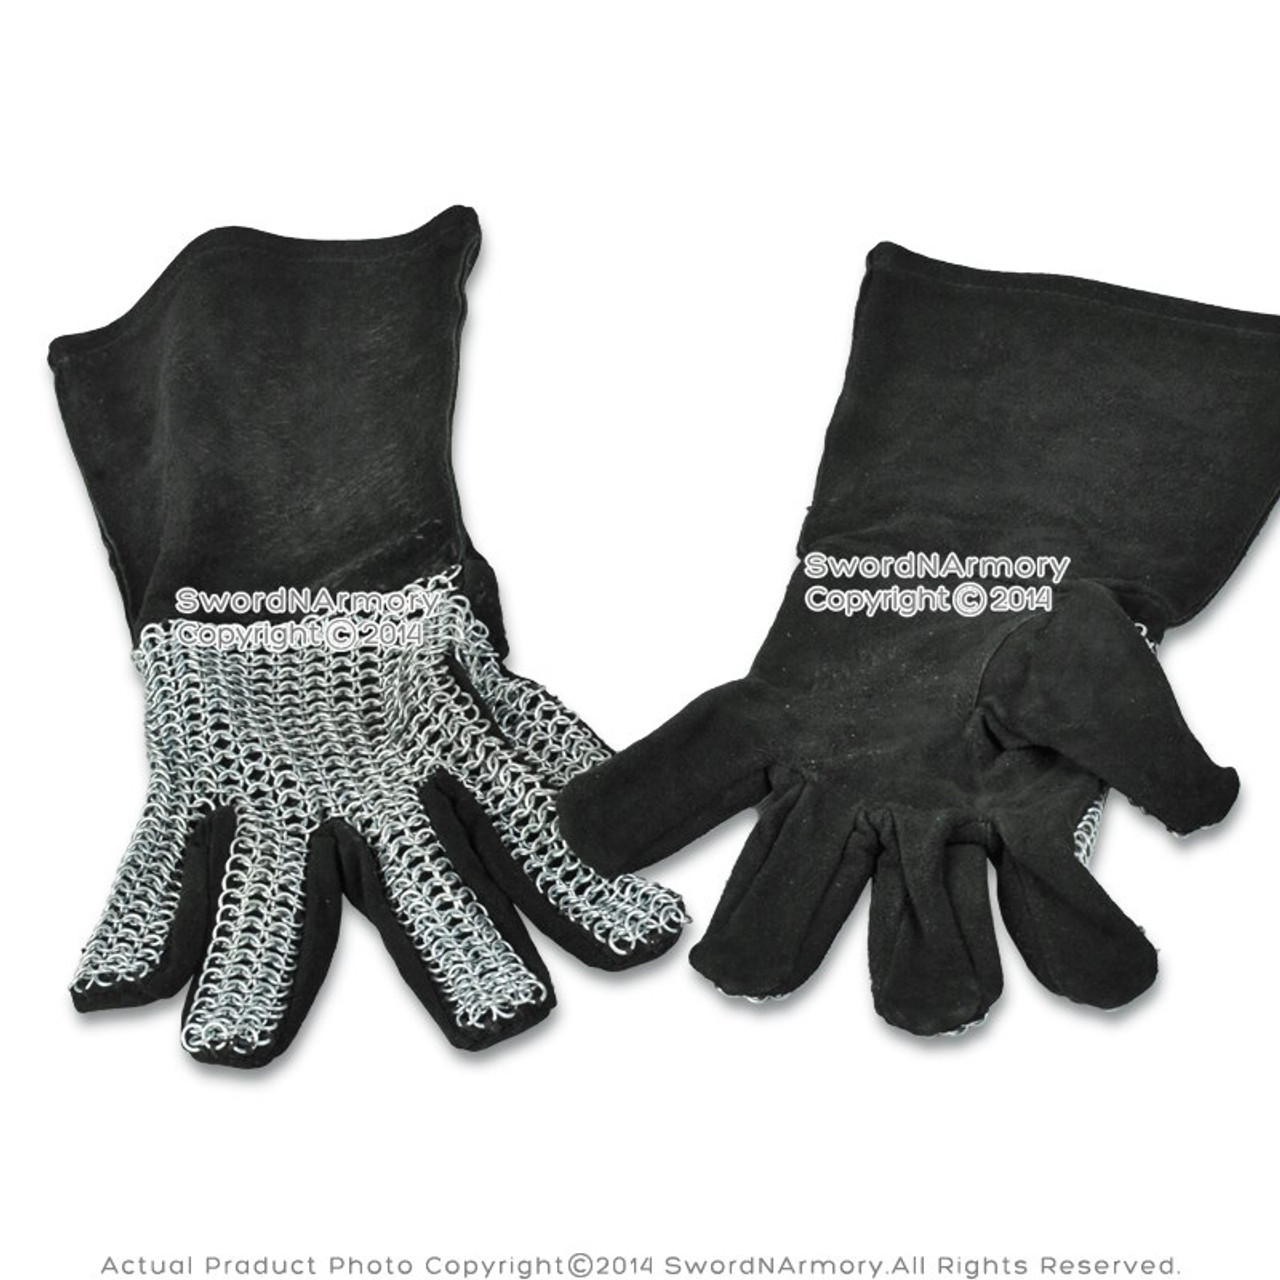 The chainmail Glove